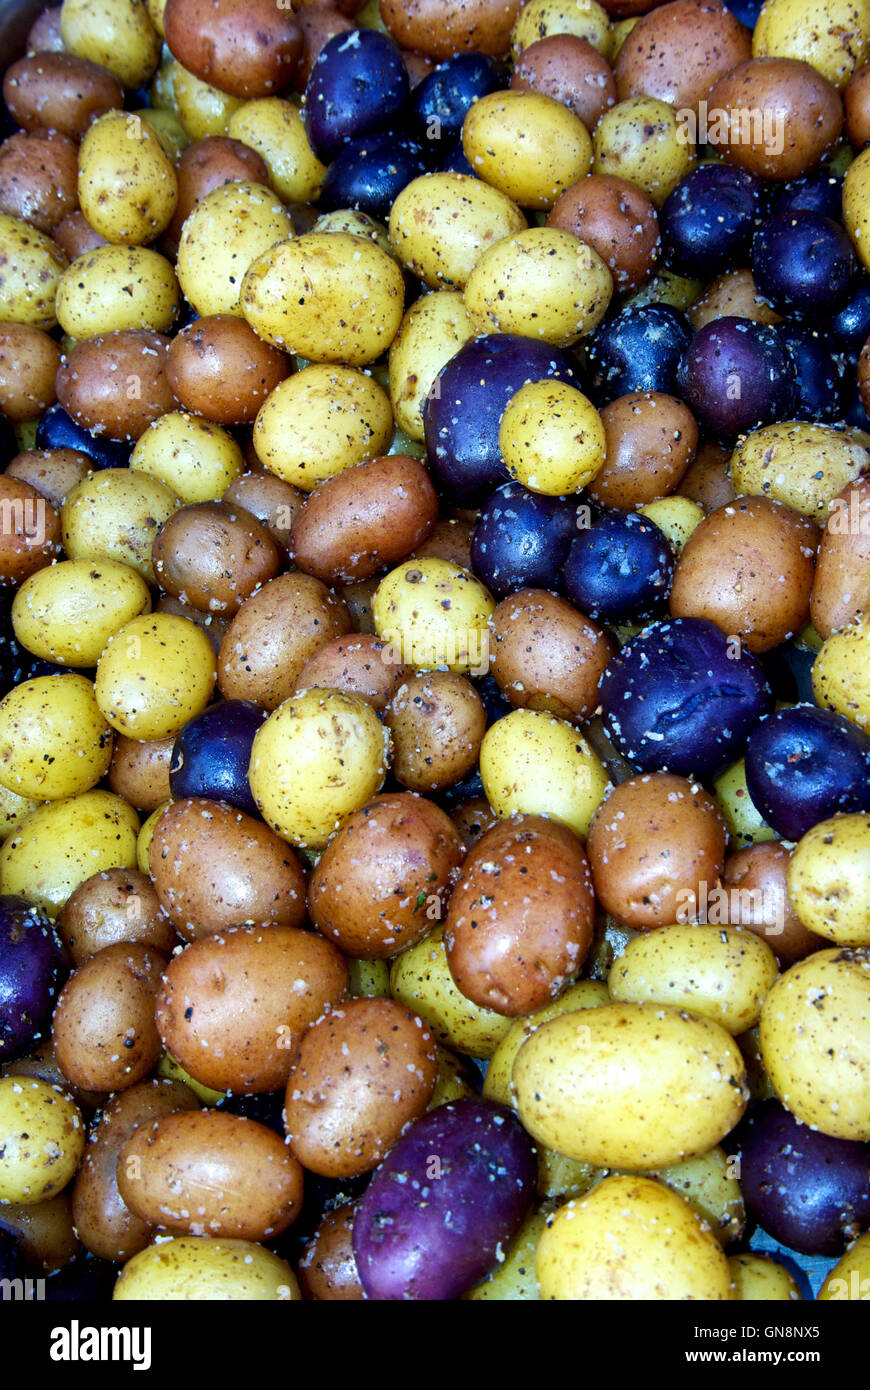 Steamed & salted purple Yukon gold & red jacket baby potatoes Stock Photo